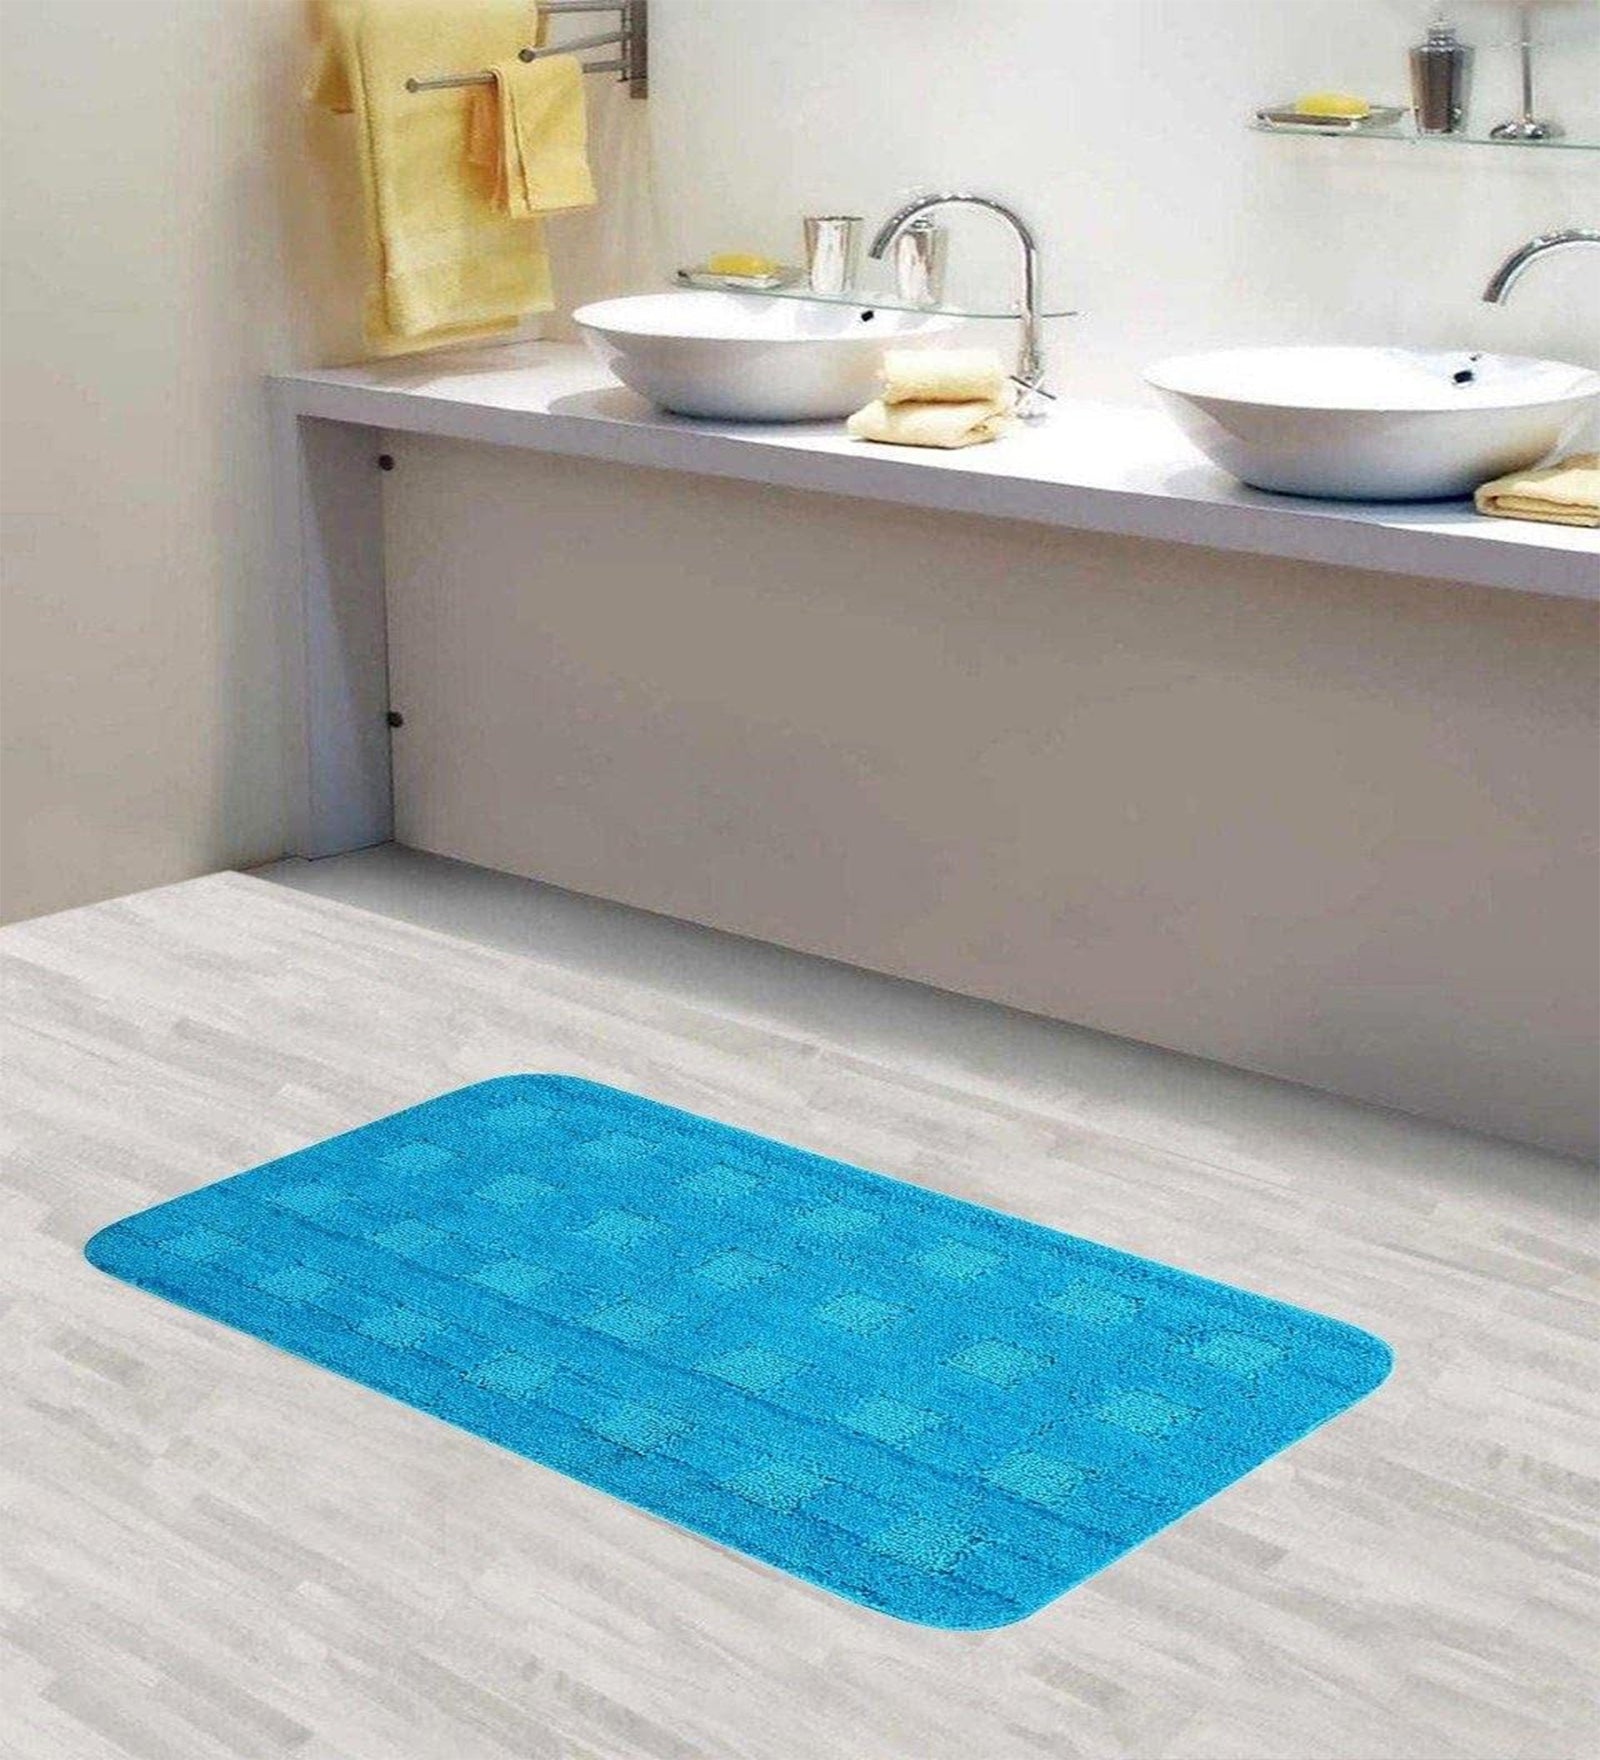 Lushomes Bathroom Mat, 1200 GSM Floor Mat with High Pile Microfiber, mat for bathroom floor with Anti Skid Latex Backing, floor mats for home, non slip (19 x 30 Inch, Single Pc, Navy Blue)